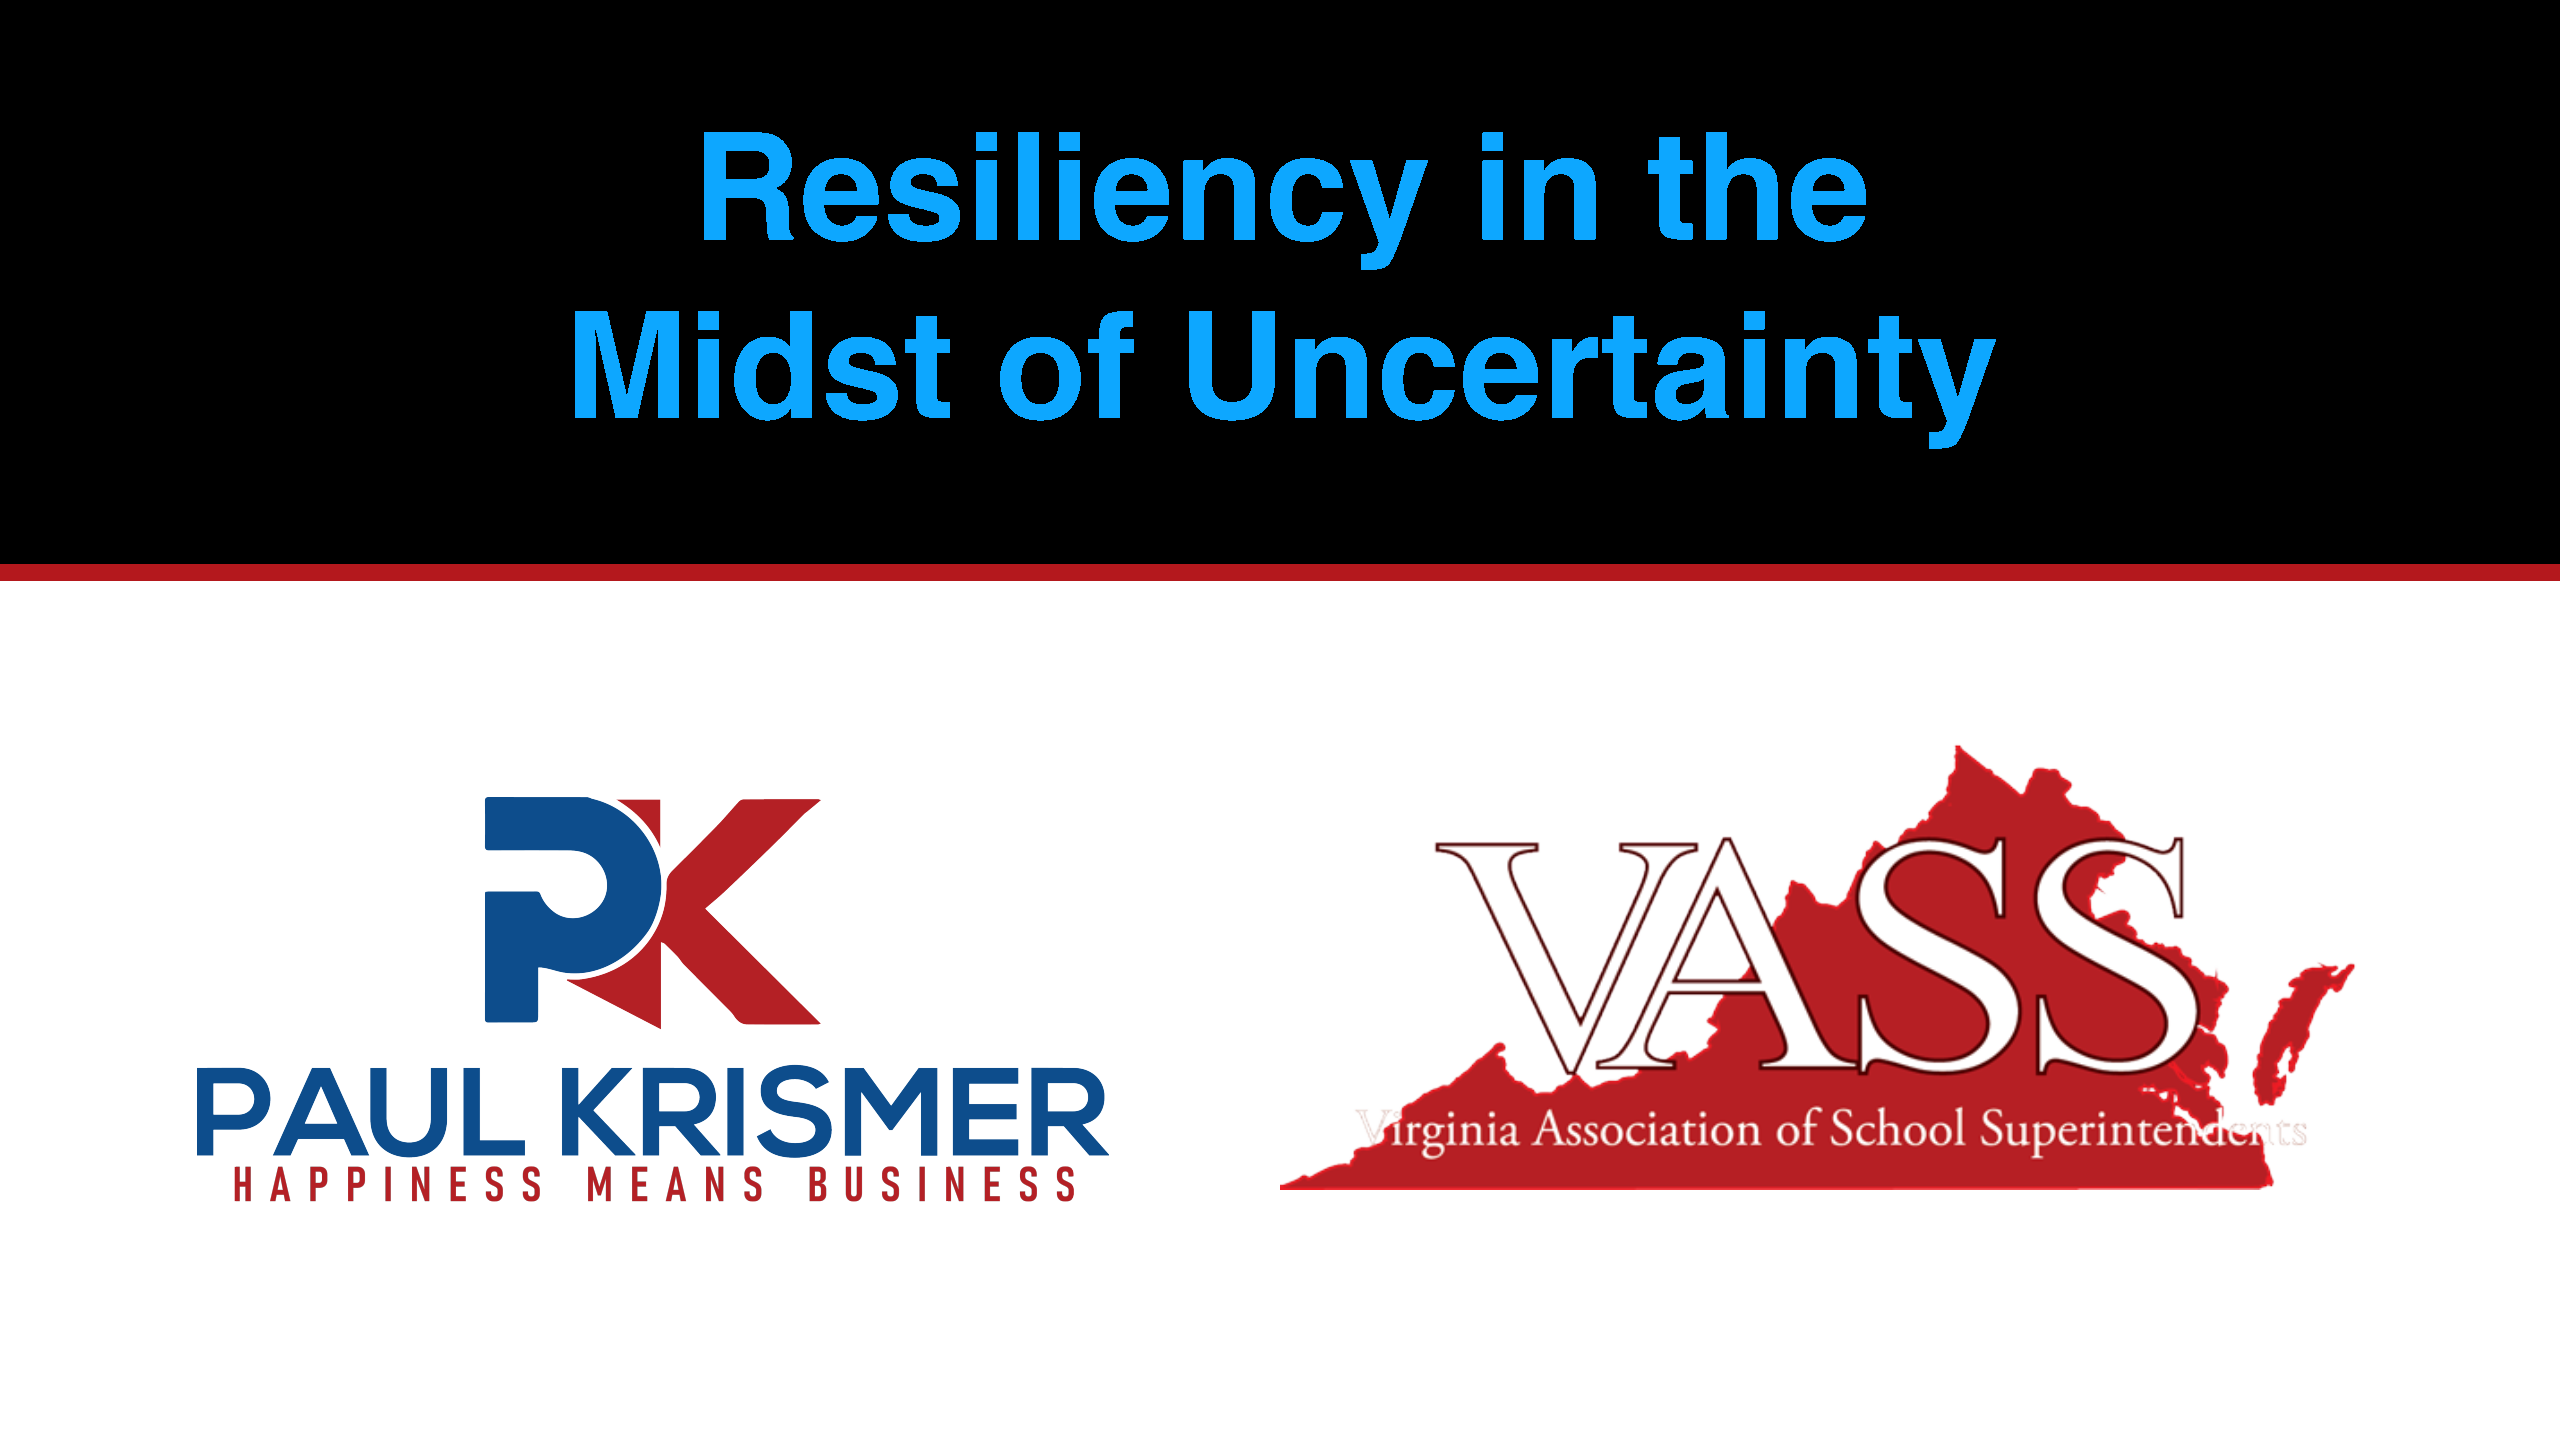 Resiliency in the Midst of Uncertainty: Deploying Proven Powerful Tools to Achieve Success